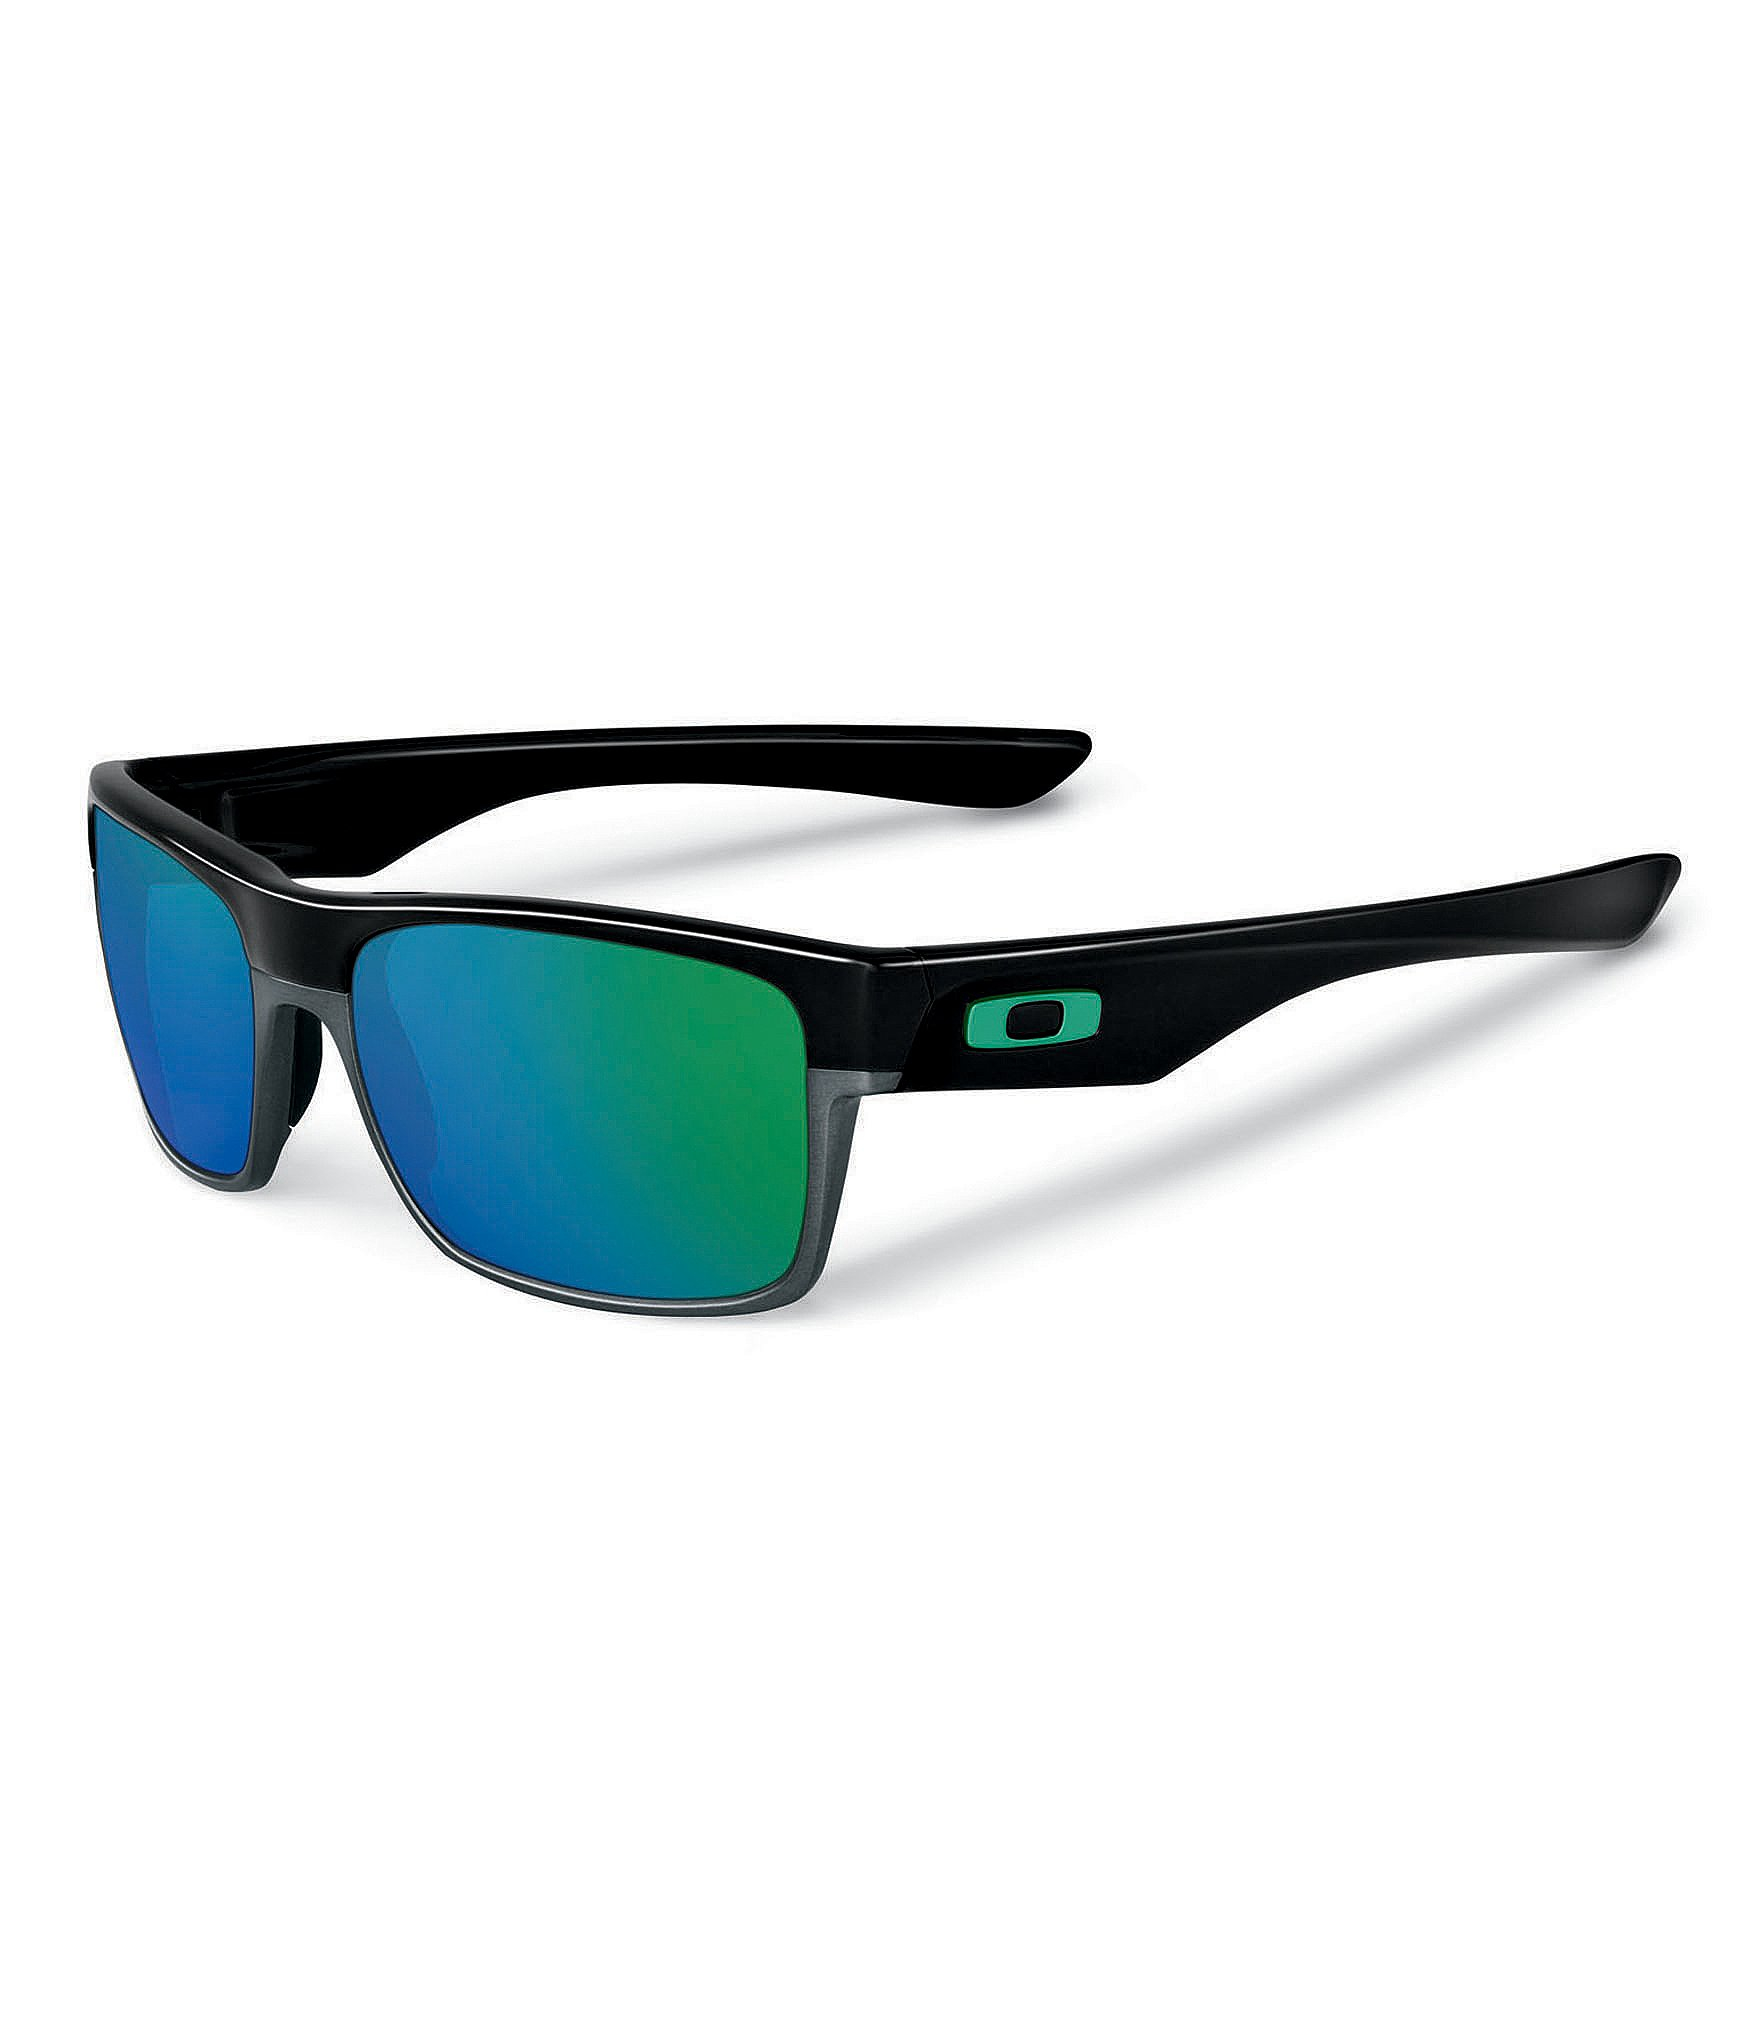 Oakley small face sunglasses for sale - 2018 mens ray band